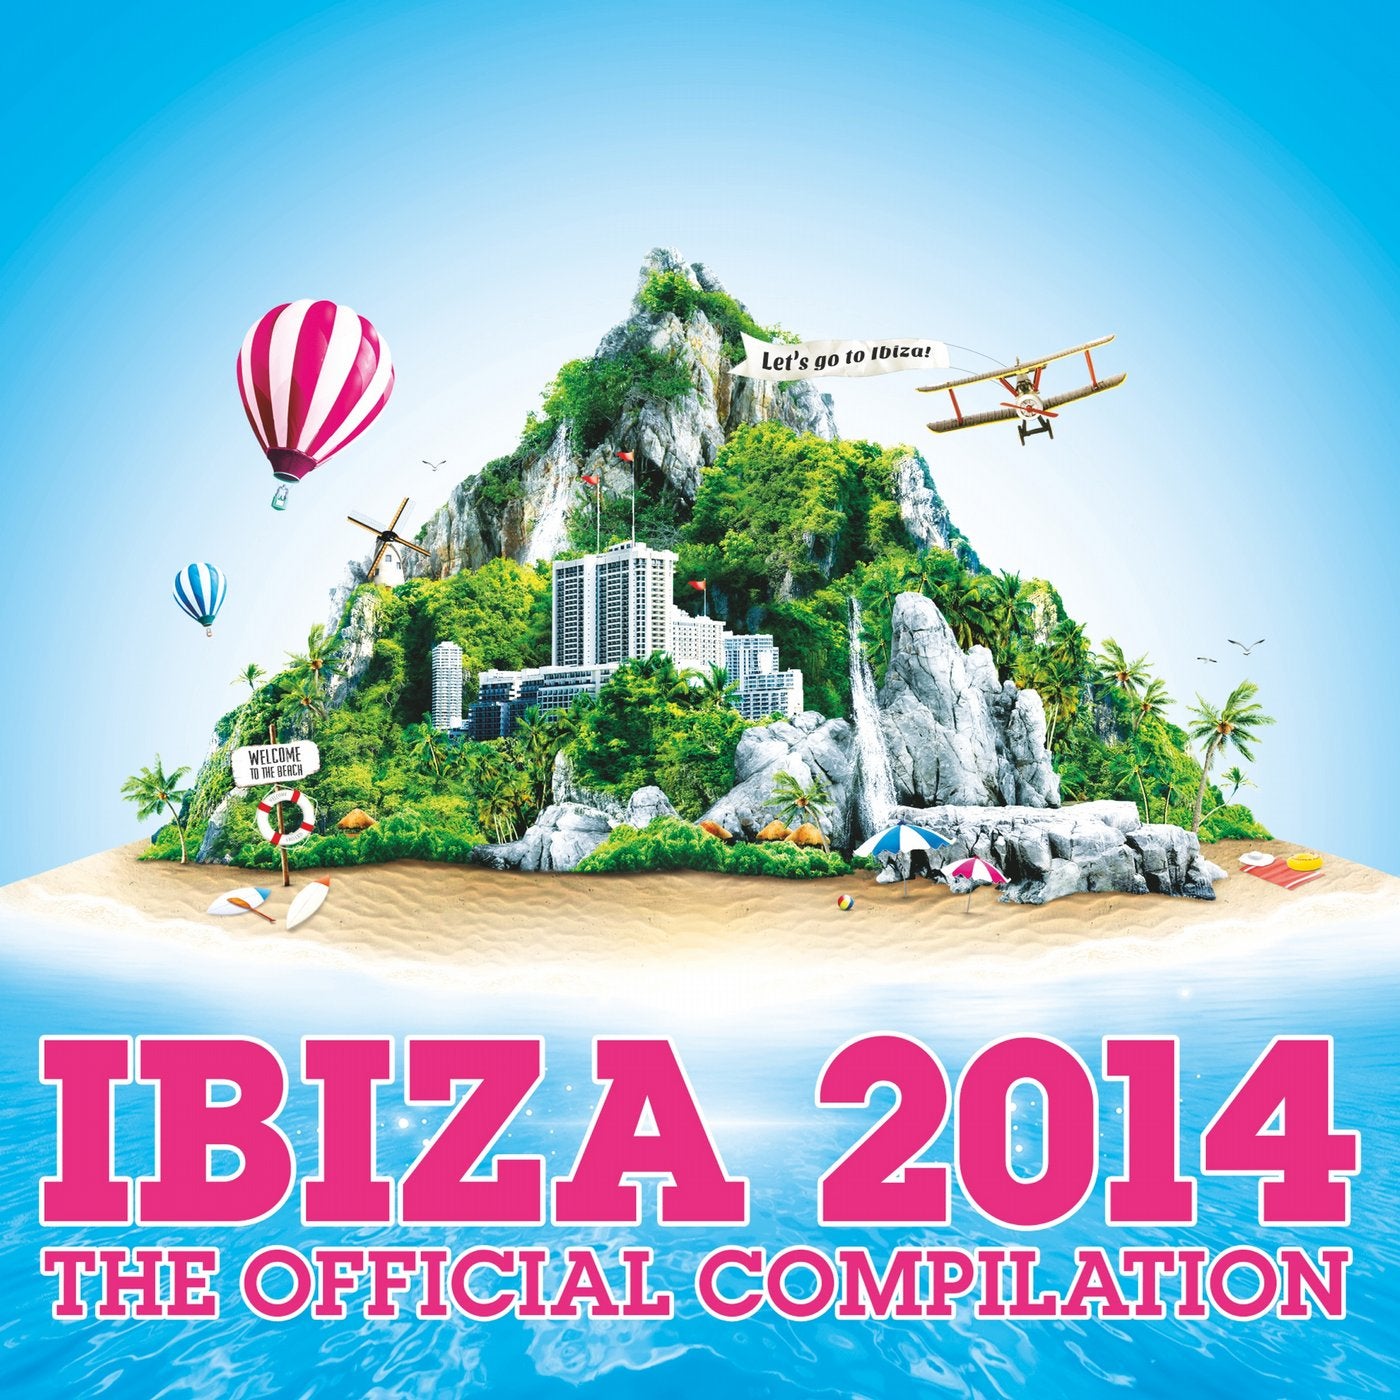 Ibiza 2014 - The Official Compilation